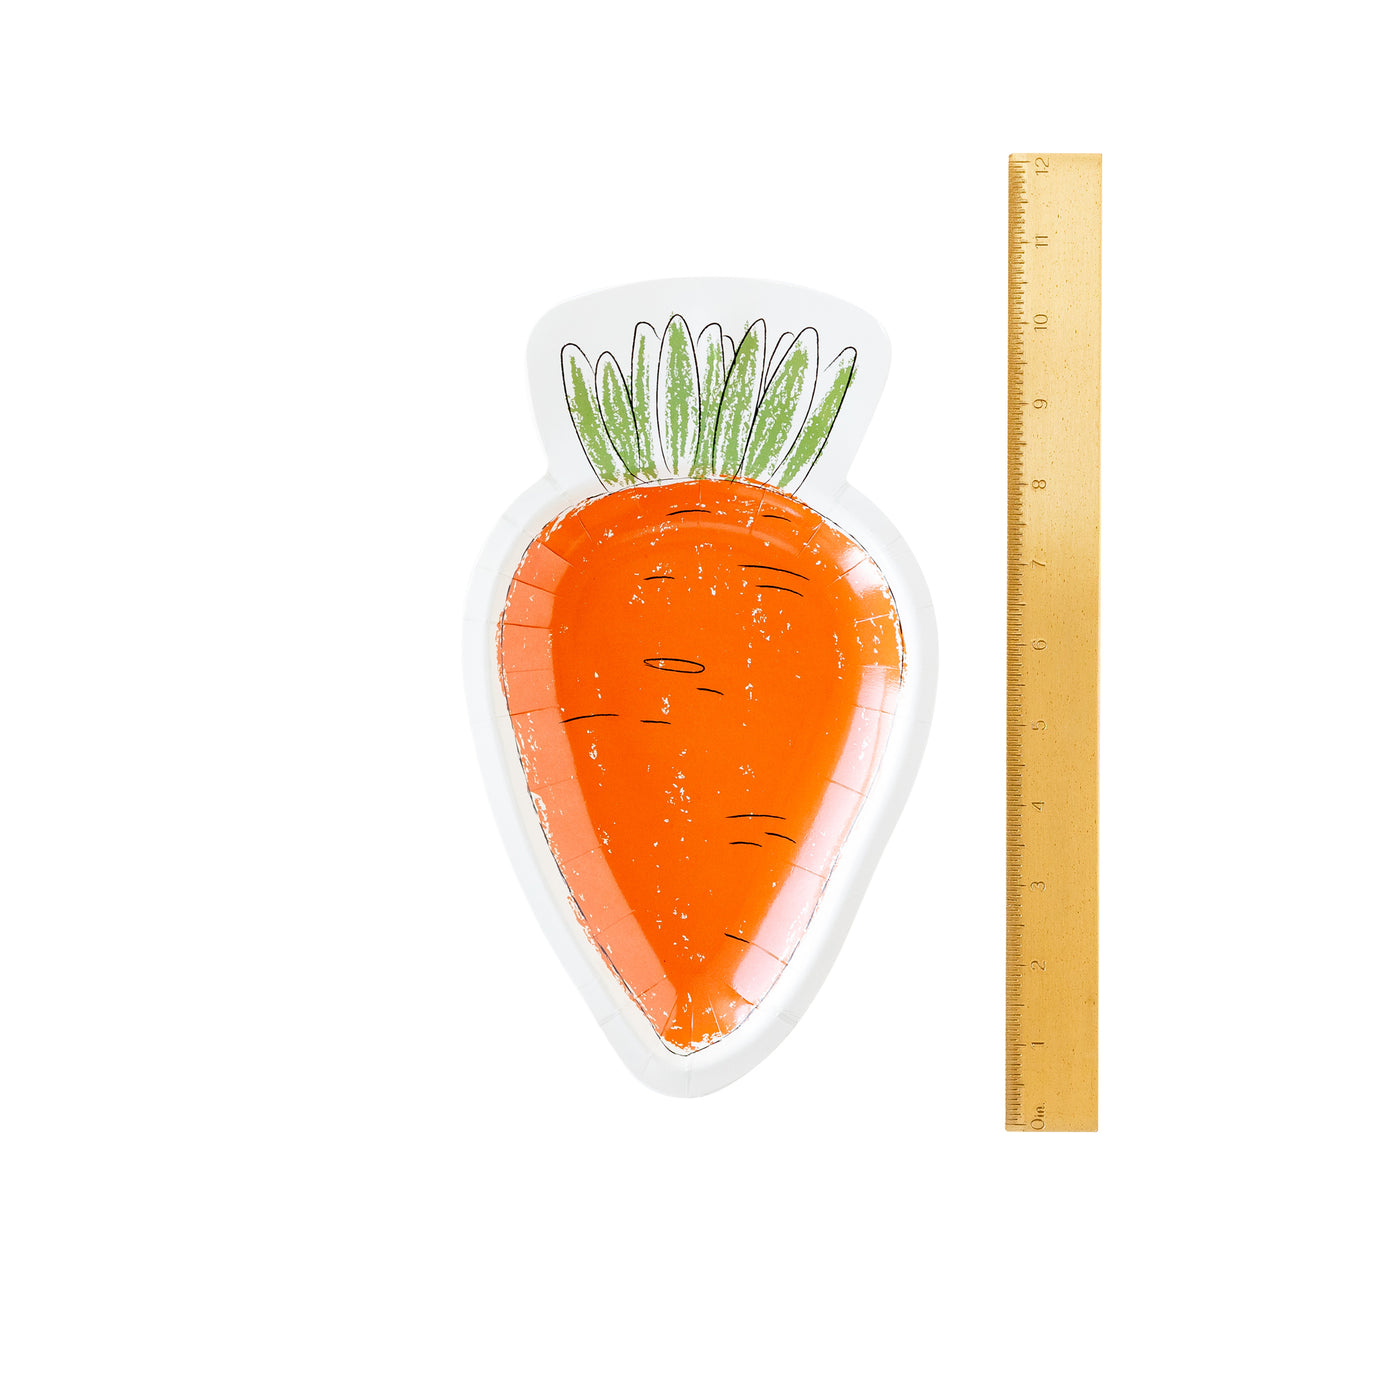 Sketchy Carrot Shaped Plate  My Mind's Eye – My Mind's Eye Paper Goods